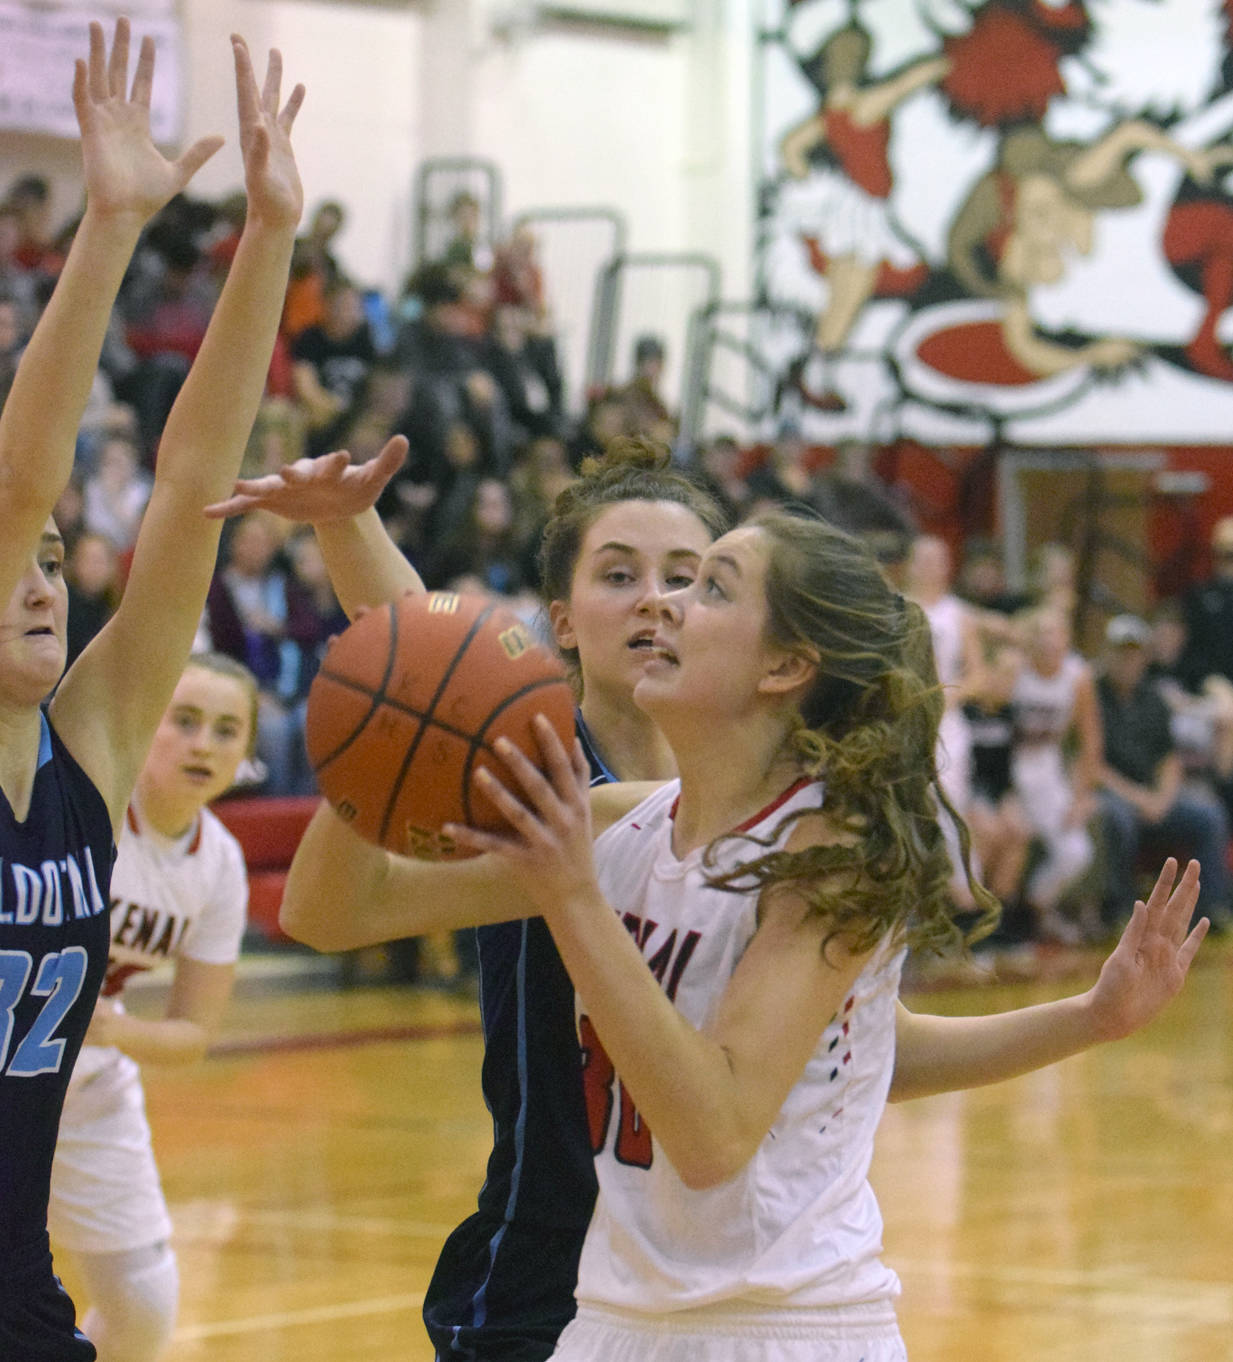 Soldotna’s Danica Schmidt and Aliann Schmidt try to stop Kenai Central’s Brooke Satathite on Tuesday, Jan. 16, 2018, on Cliff Massie Court at Kenai Central High School. (Photo by Jeff Helminiak/Peninsula Clarion)